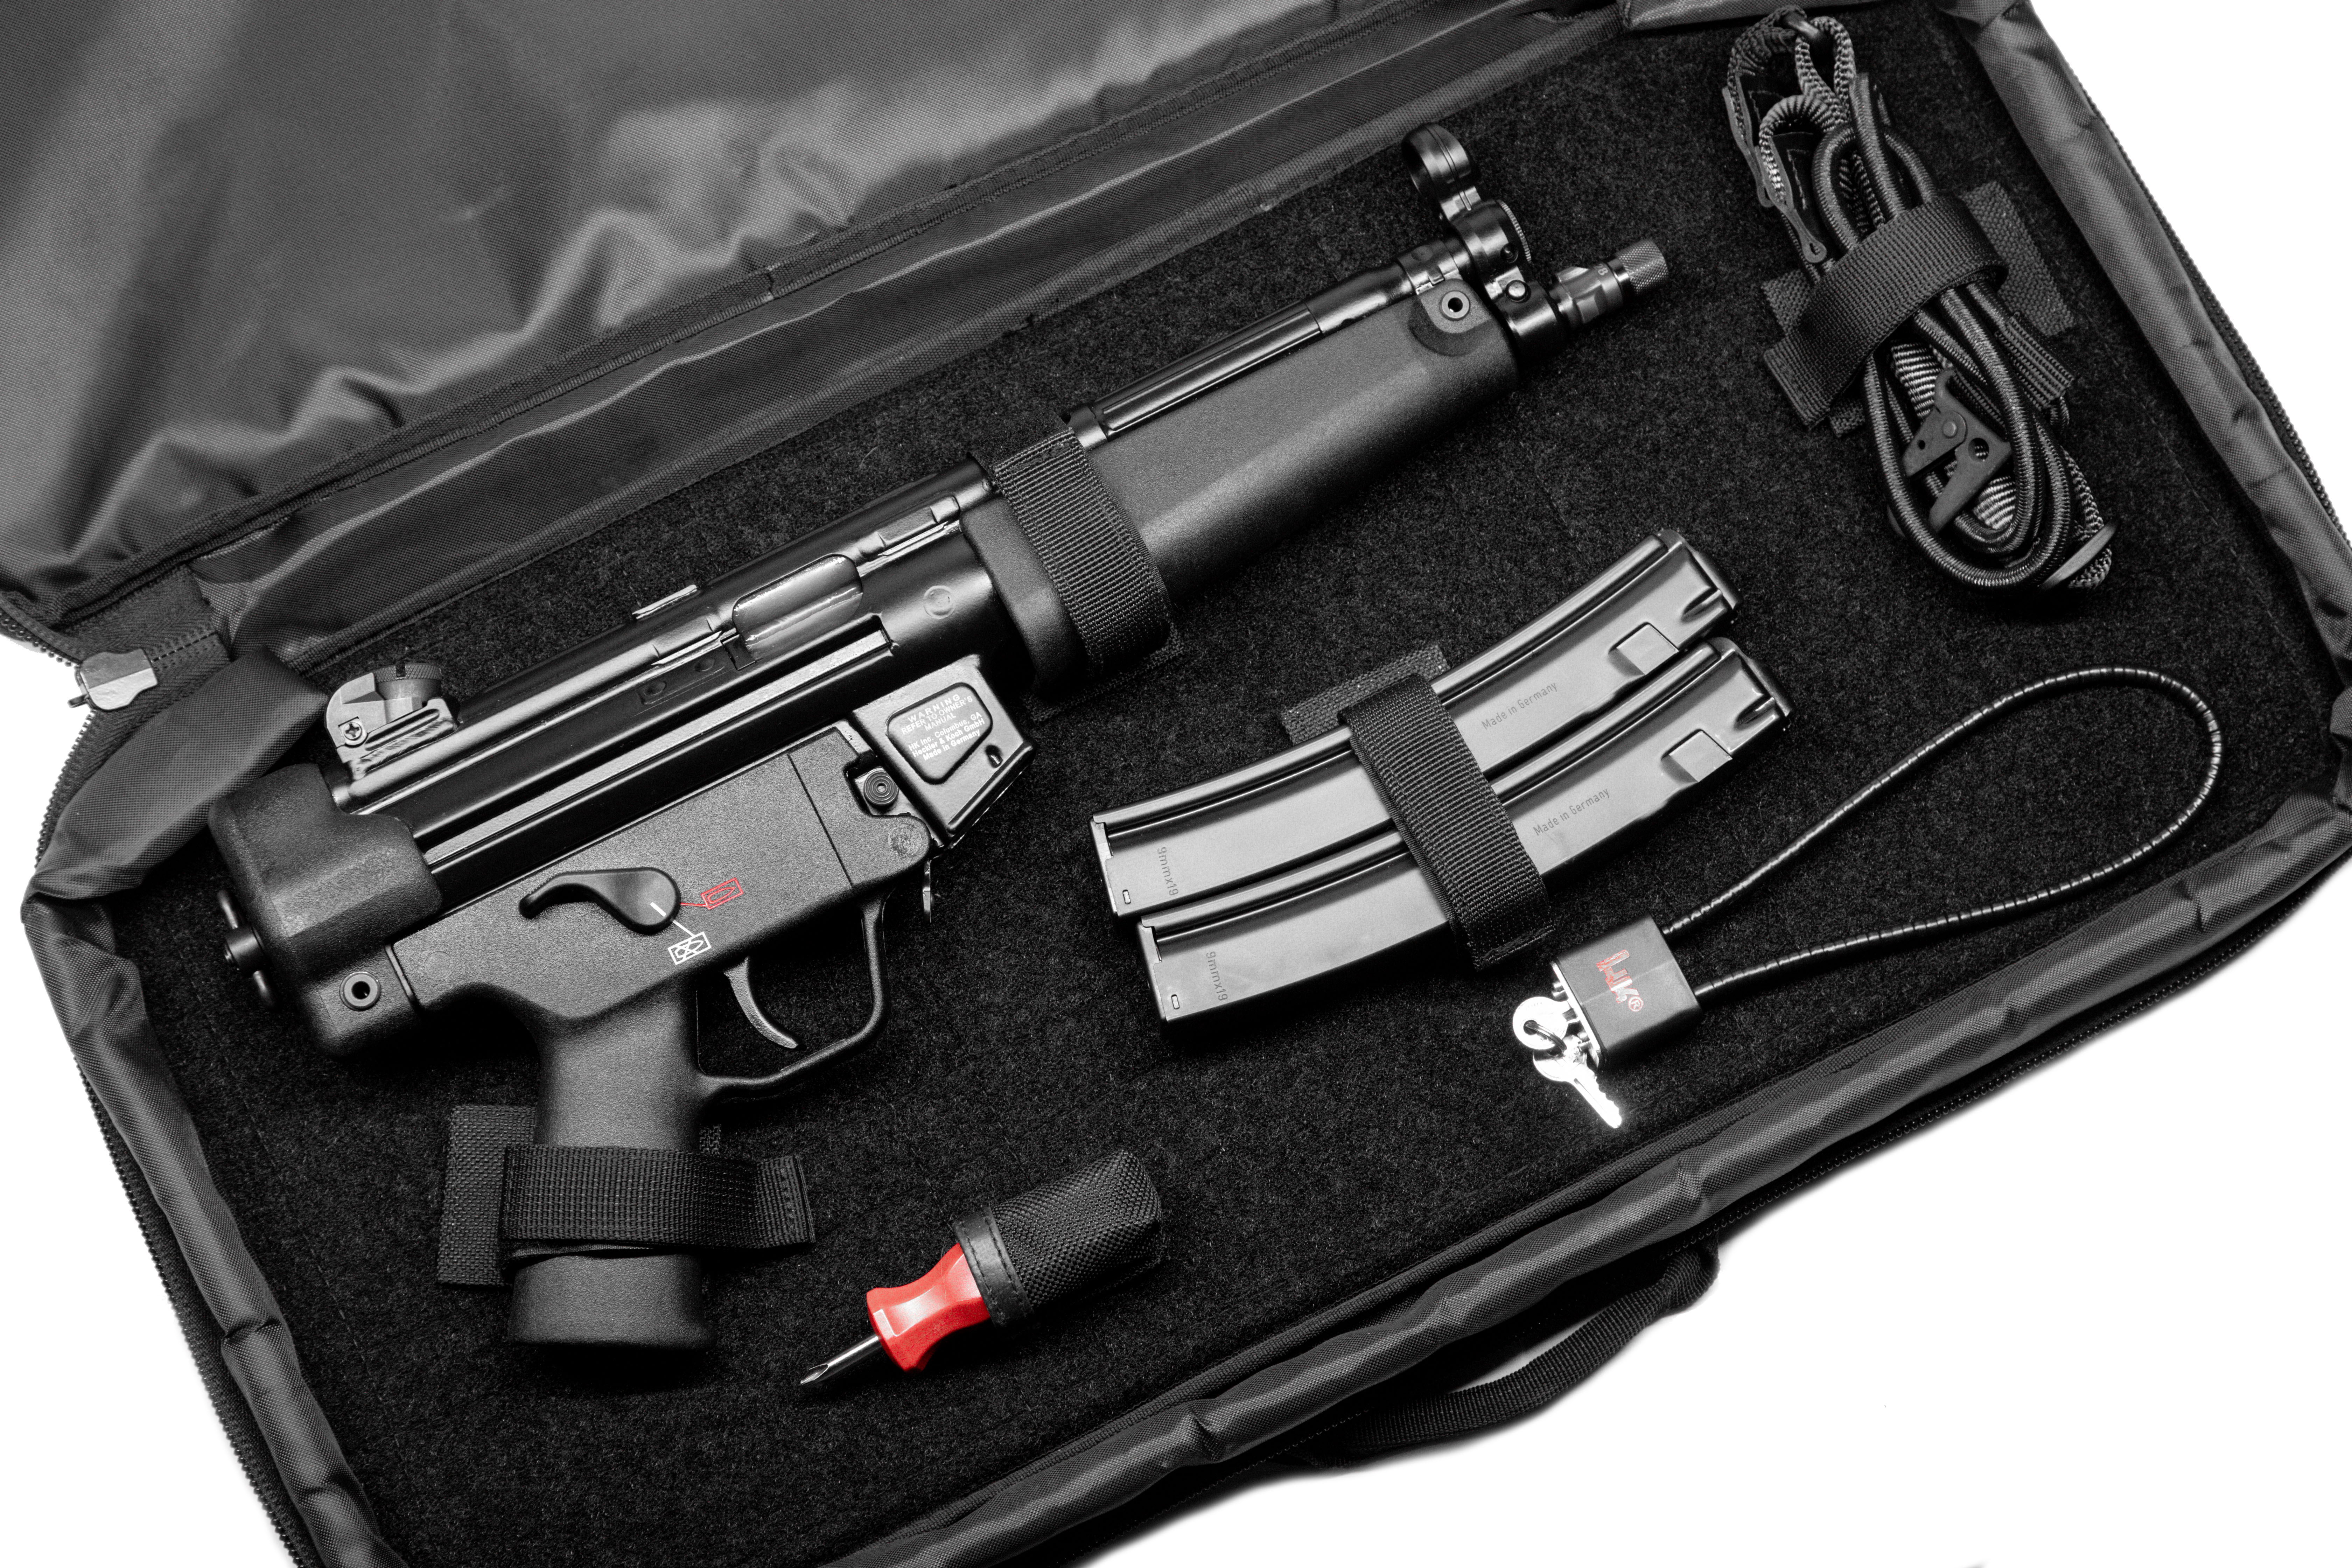 The SP5 comes in a soft case with a custom fit for the pistol, sight tool, extra magazine and sling. 